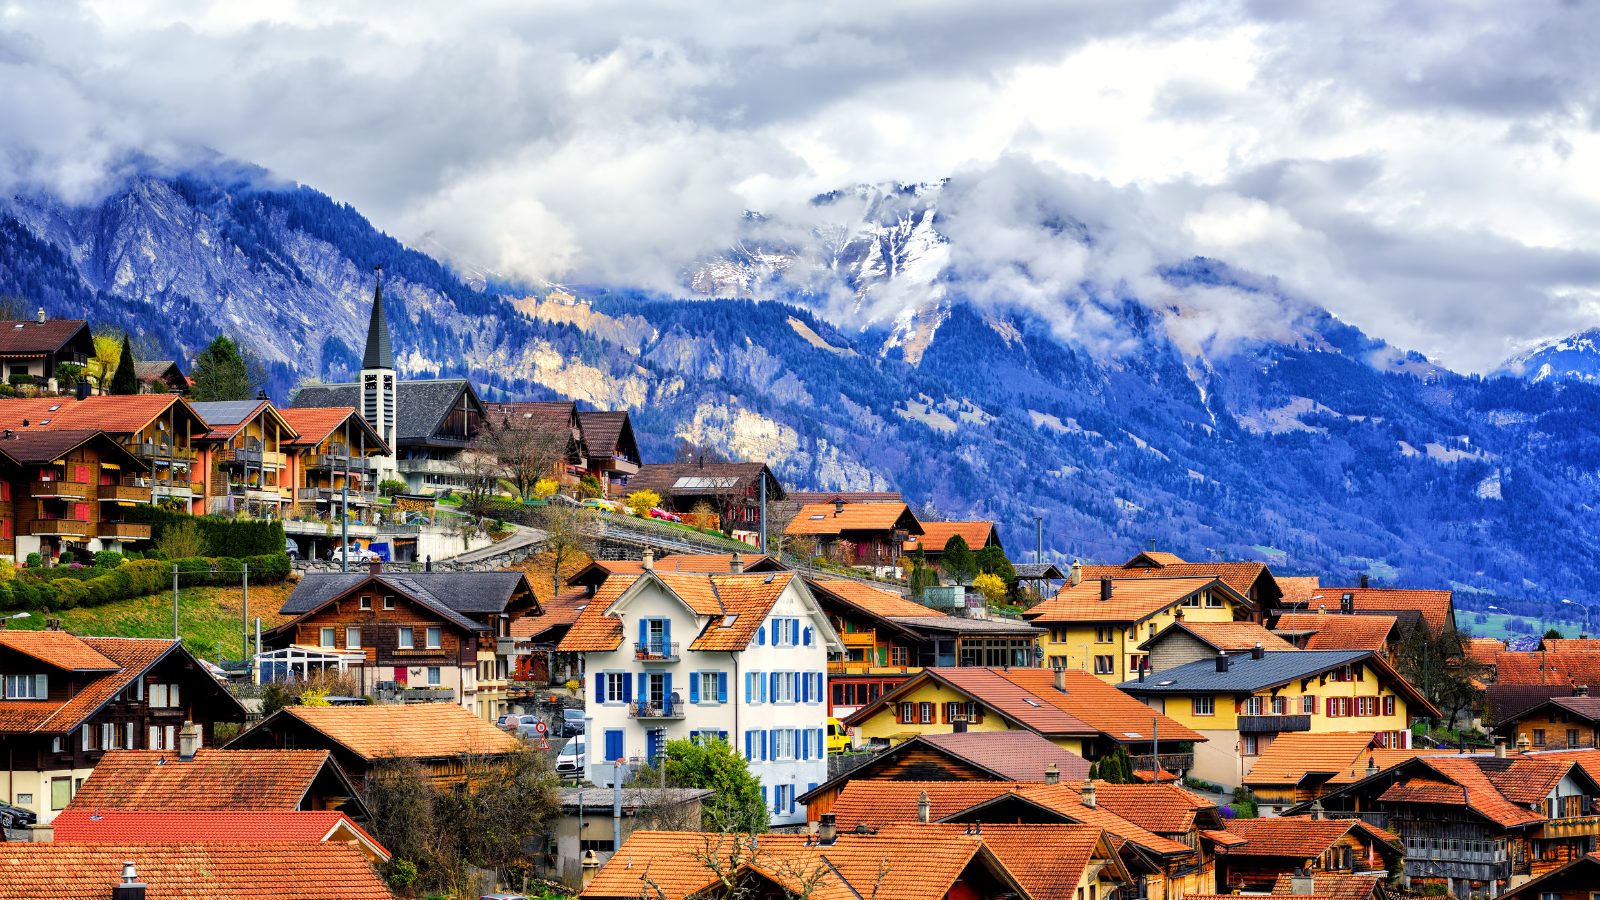 The third thing in the list of 10 best things to do in Switzerland - Explore the old towns